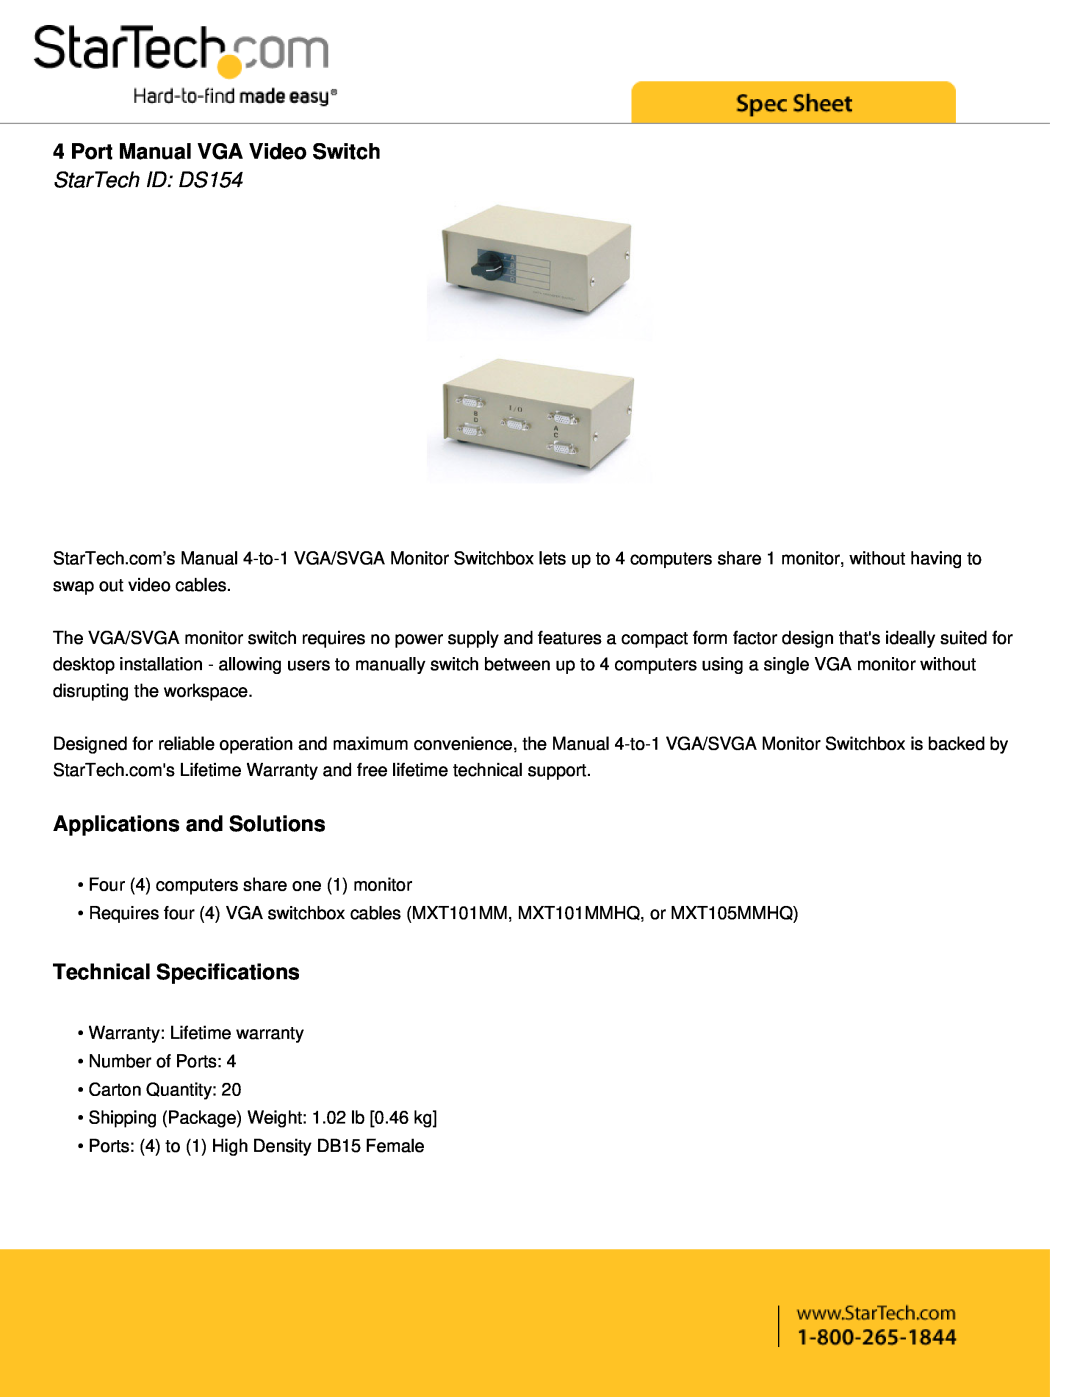 StarTech.com warranty Port Manual VGA Video Switch, StarTech ID DS154, Applications and Solutions 